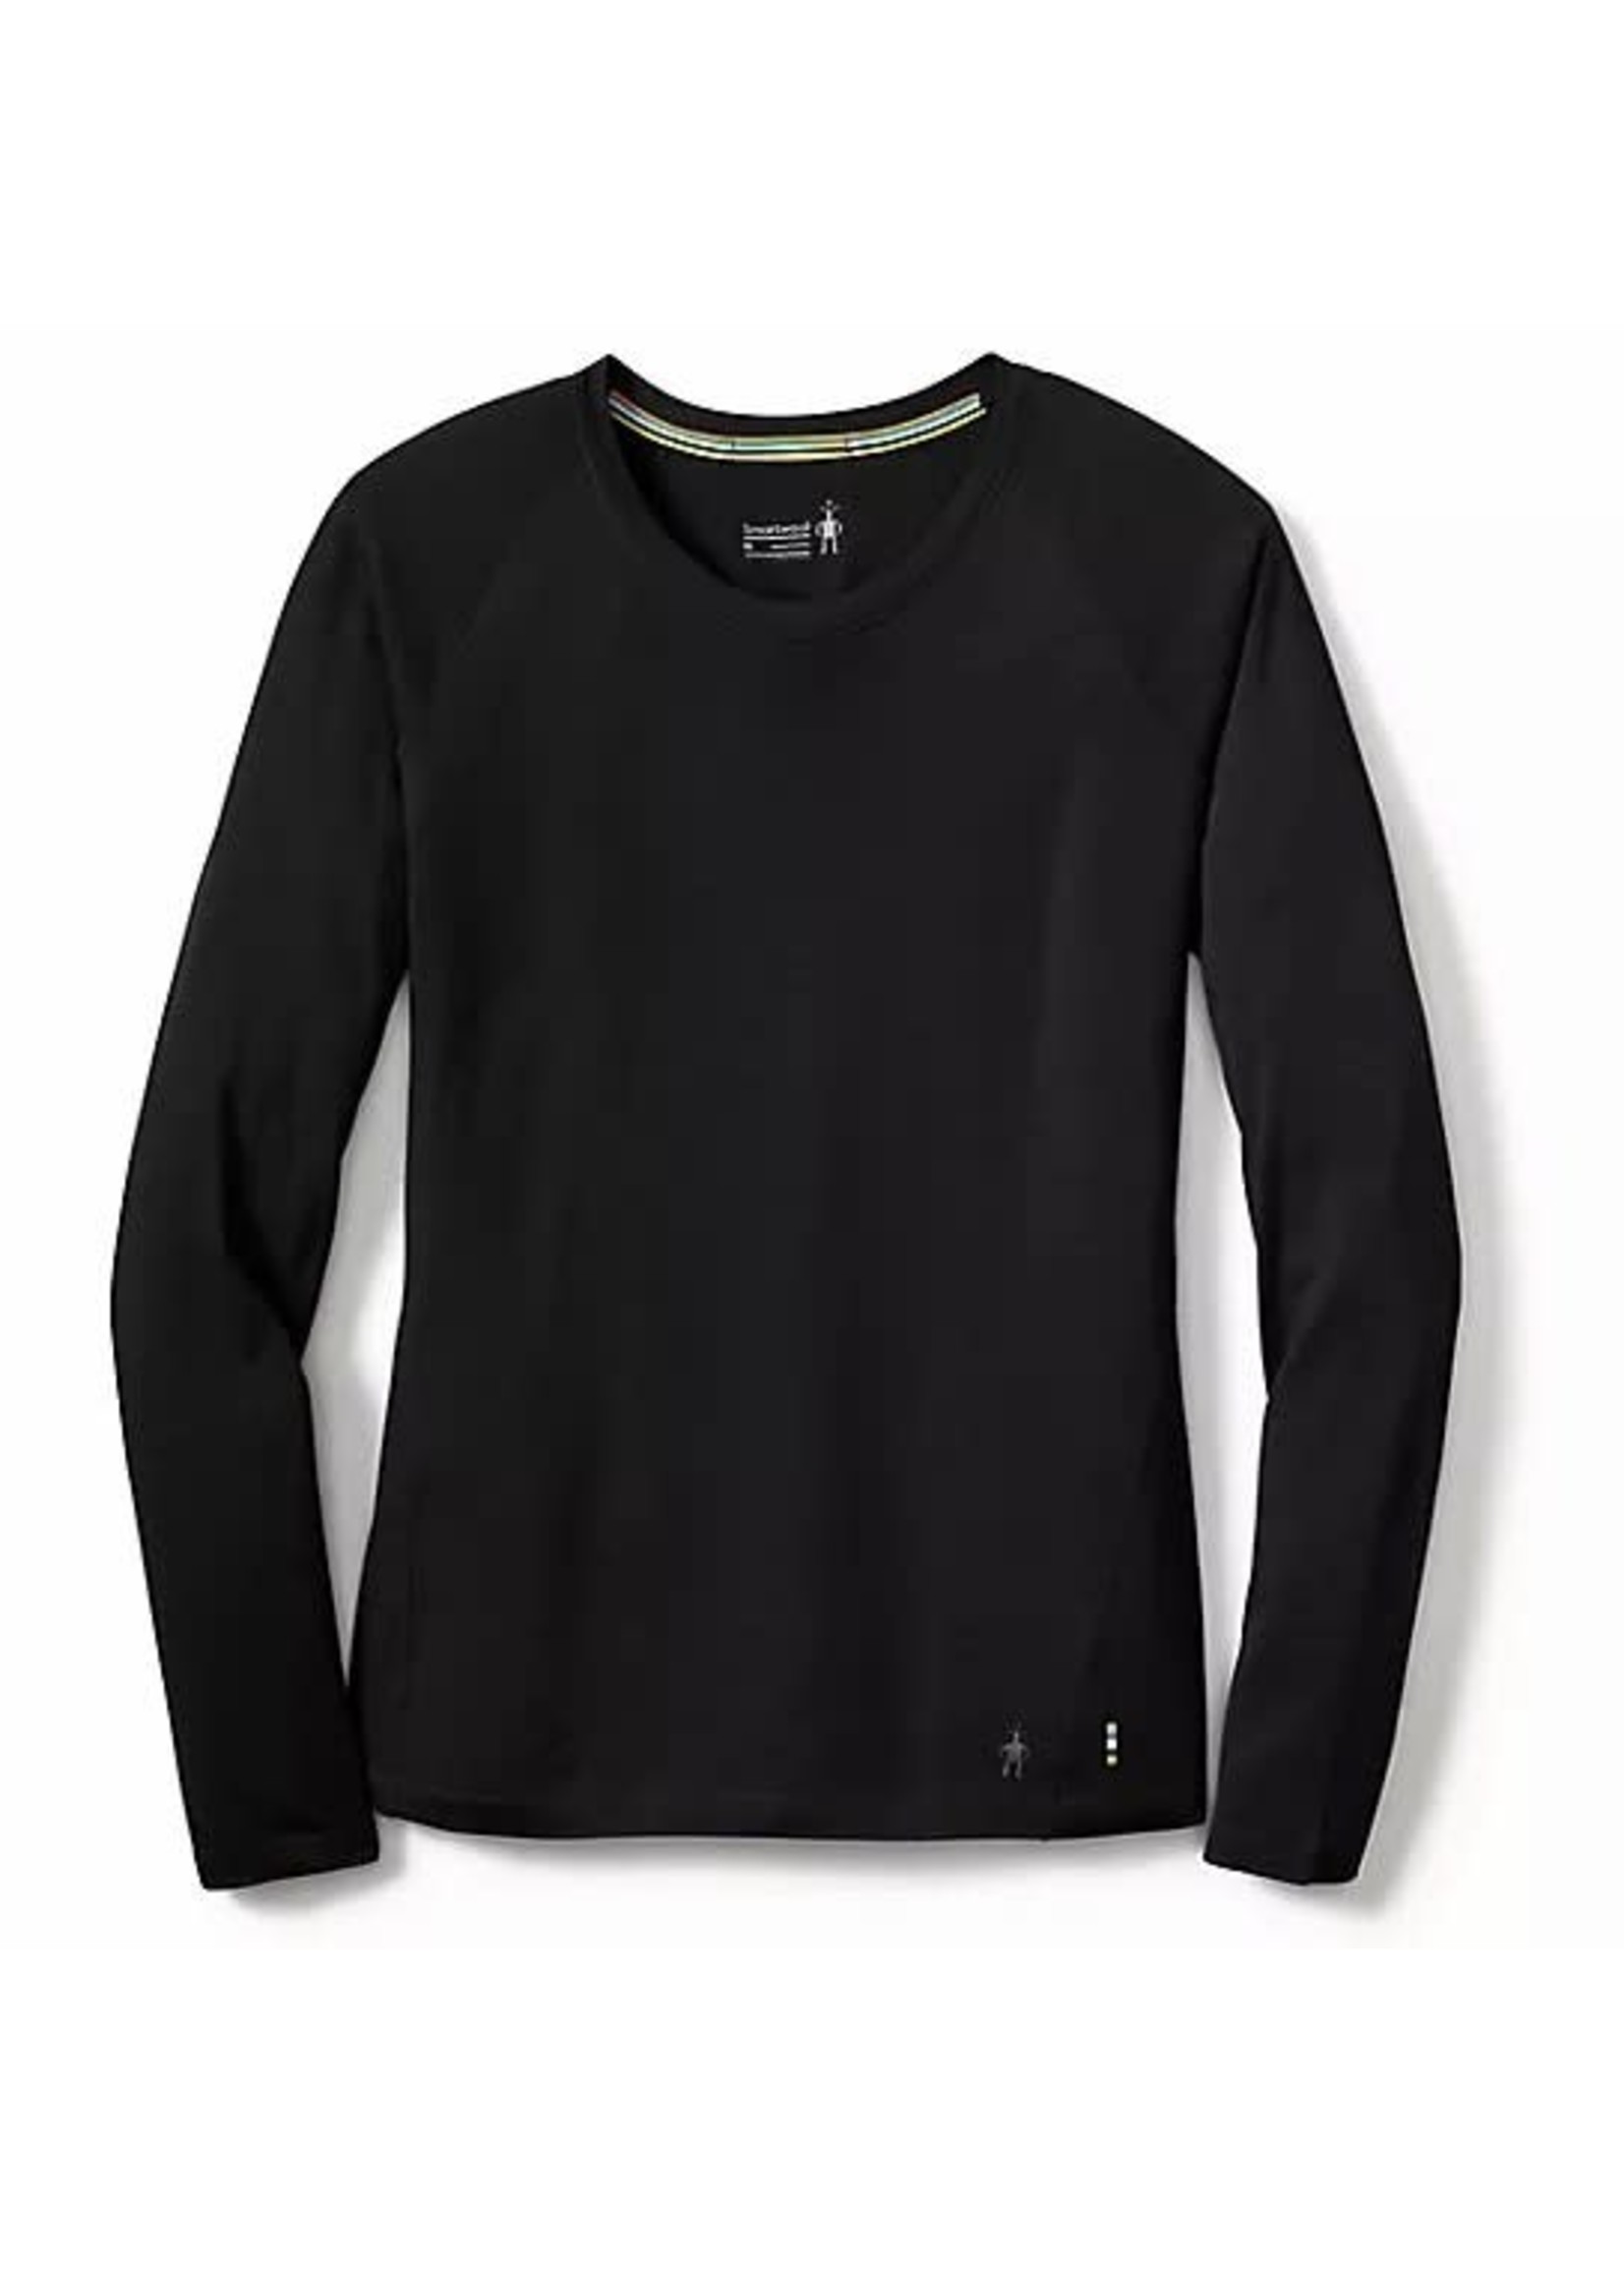 Smartwool Women's Classic All-Season Merino Base Layer Long Sleeve Boxed (chandail merinos 150 à manches longues pour femmes)